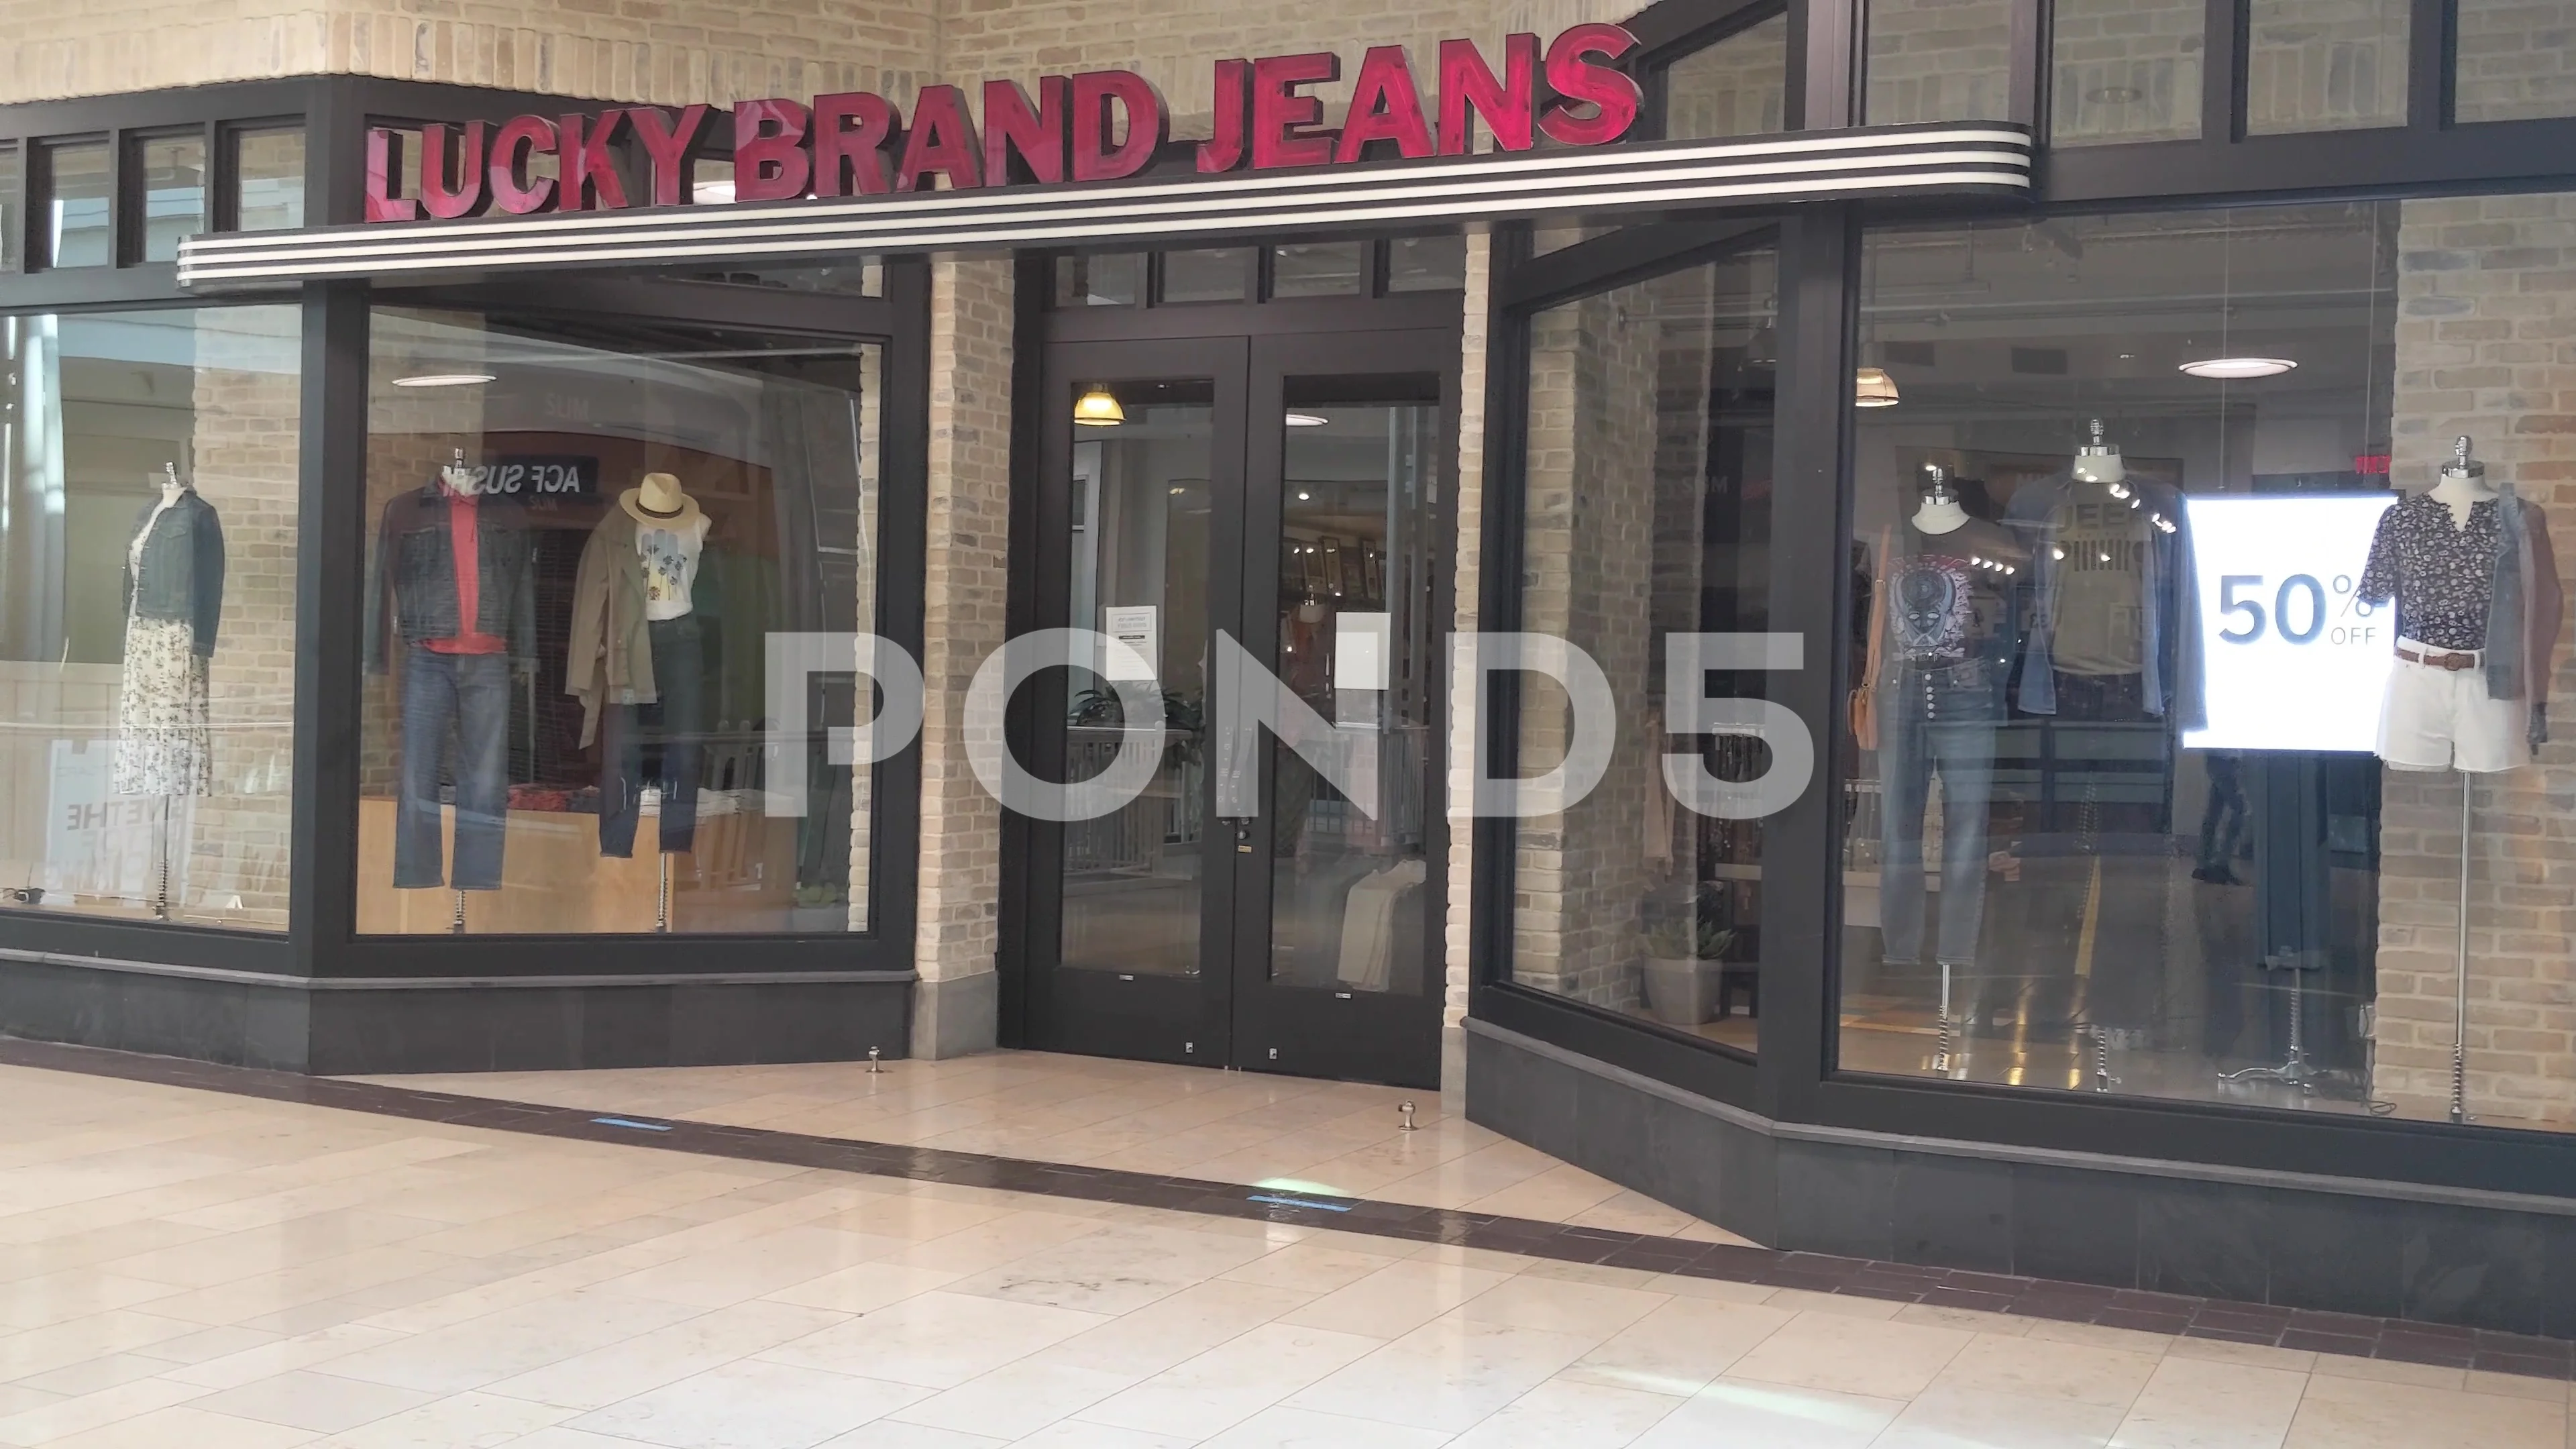 Lucky Brand Jeans - Shopping Mall, Stock Video